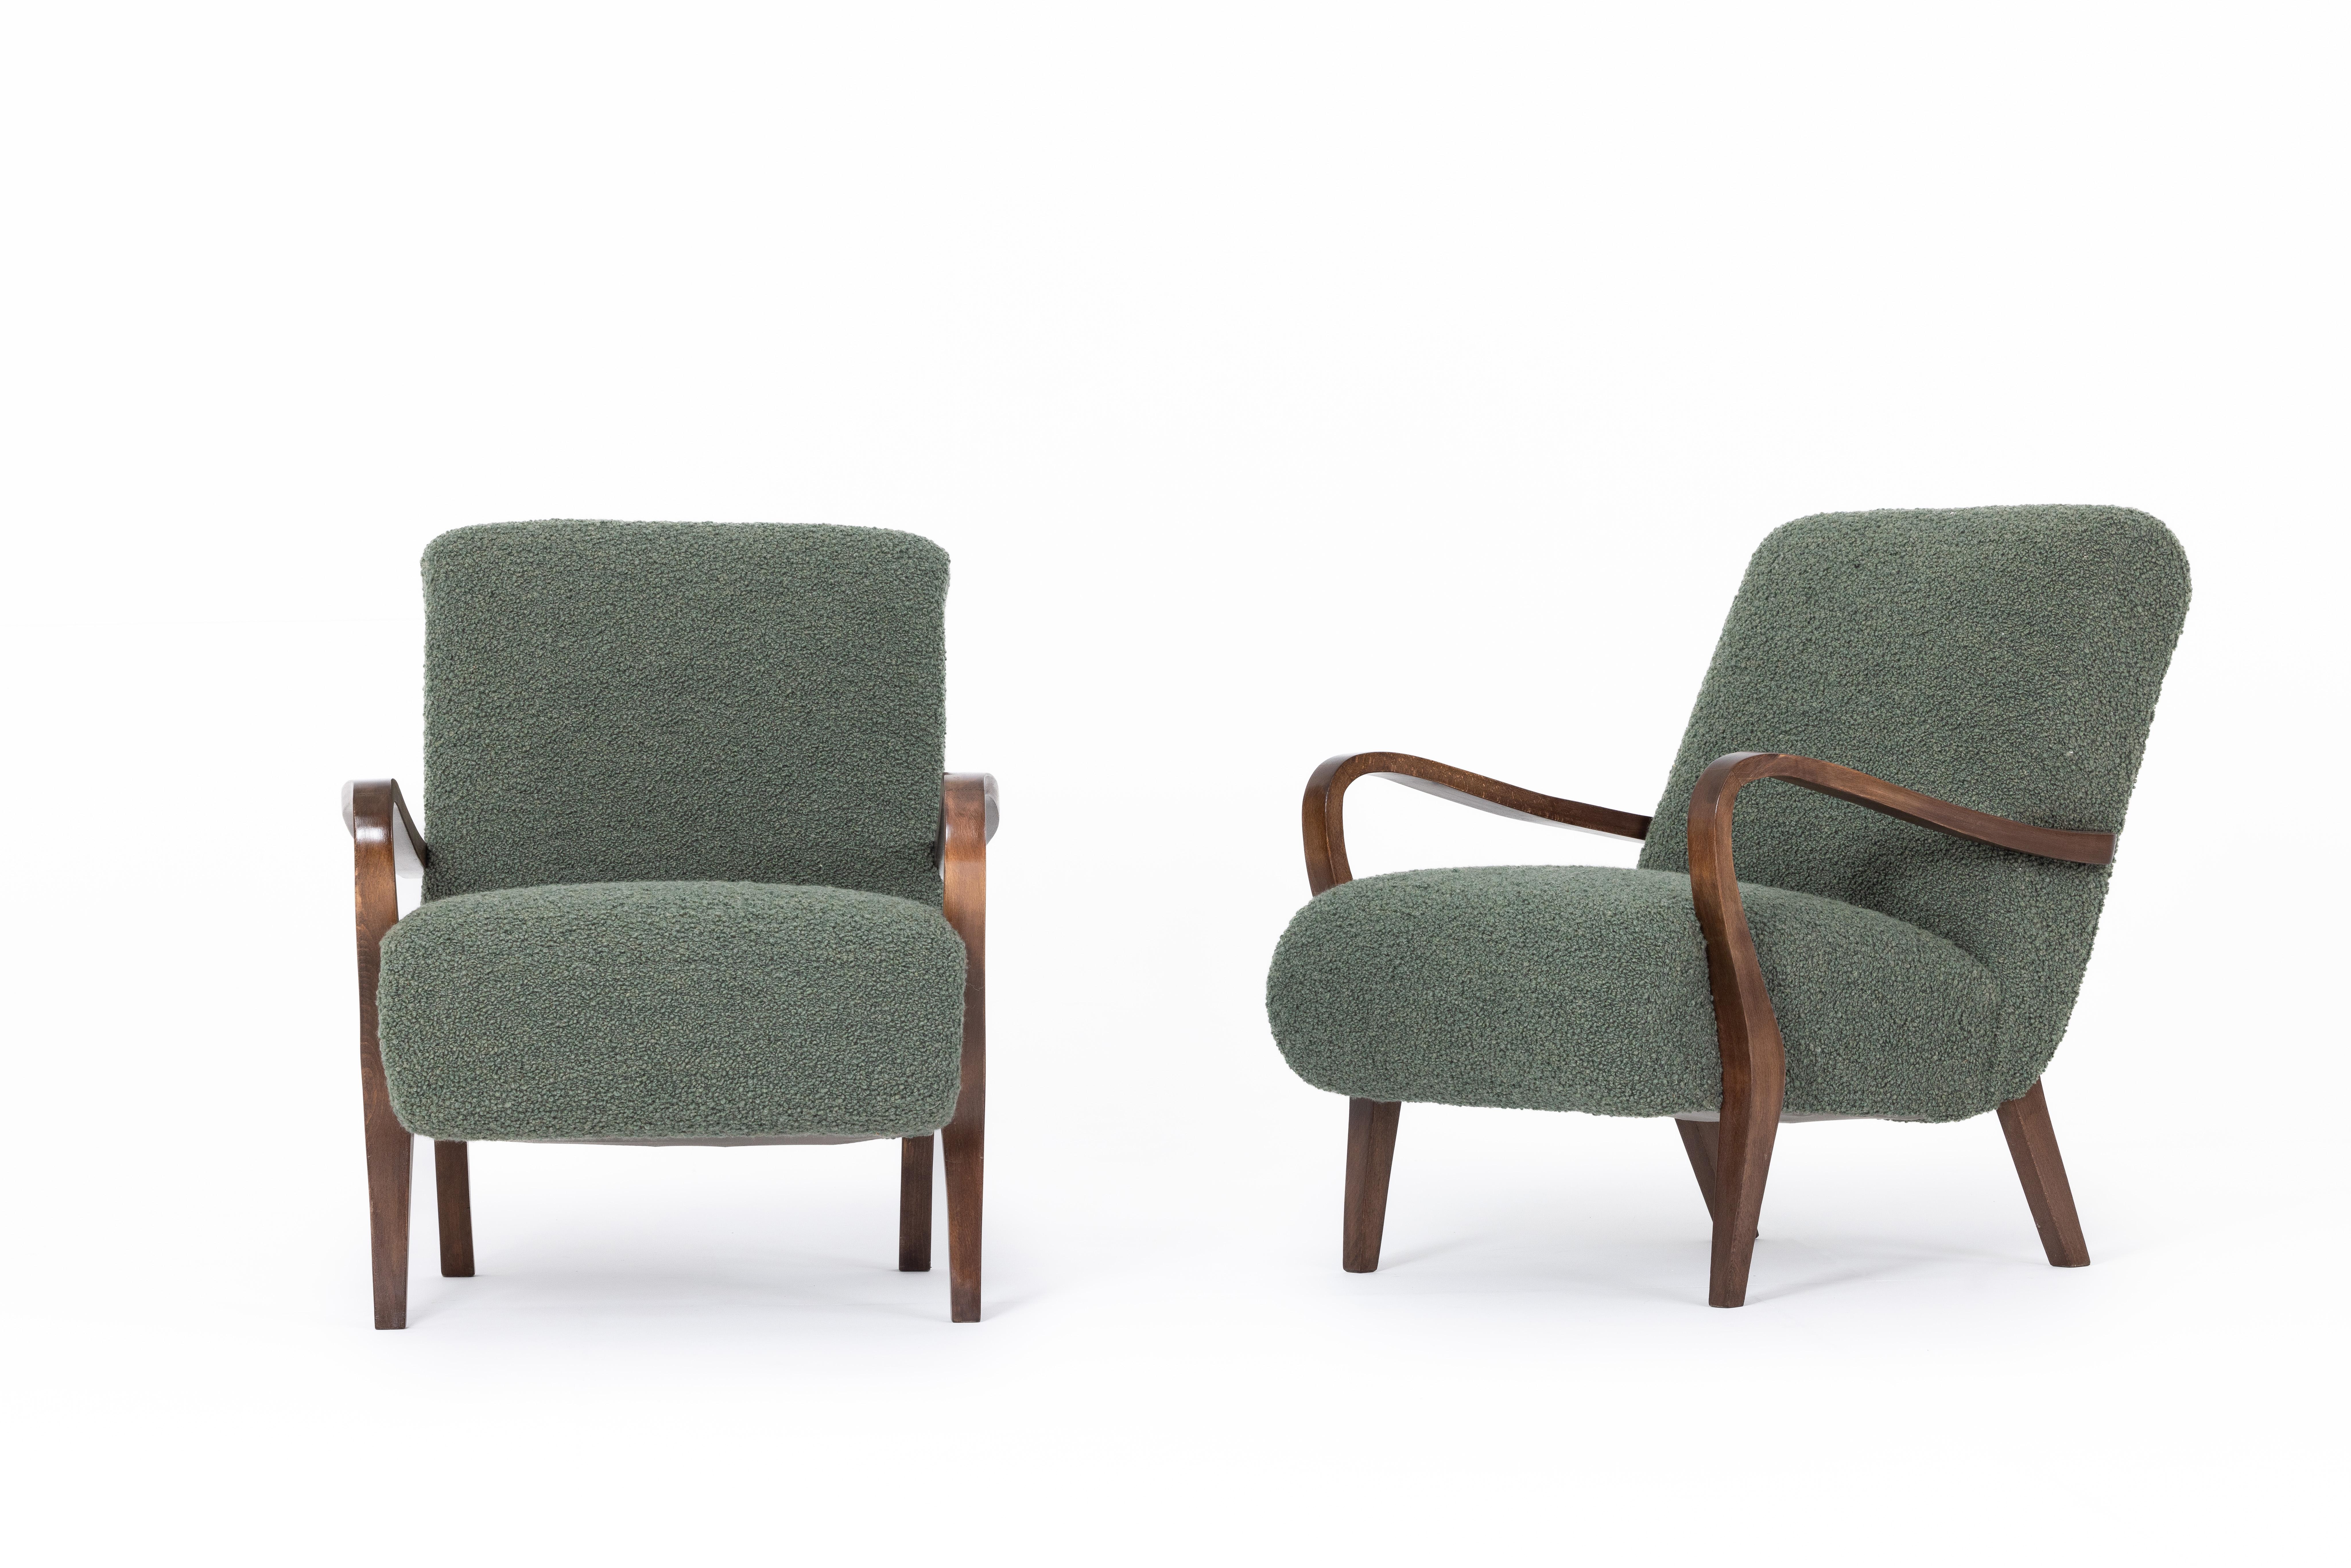 Pair of French art deco armchairs, 1920s, entirely restored, beech wood, boucle fabric by Dedar Milano (Nimbus col.9)